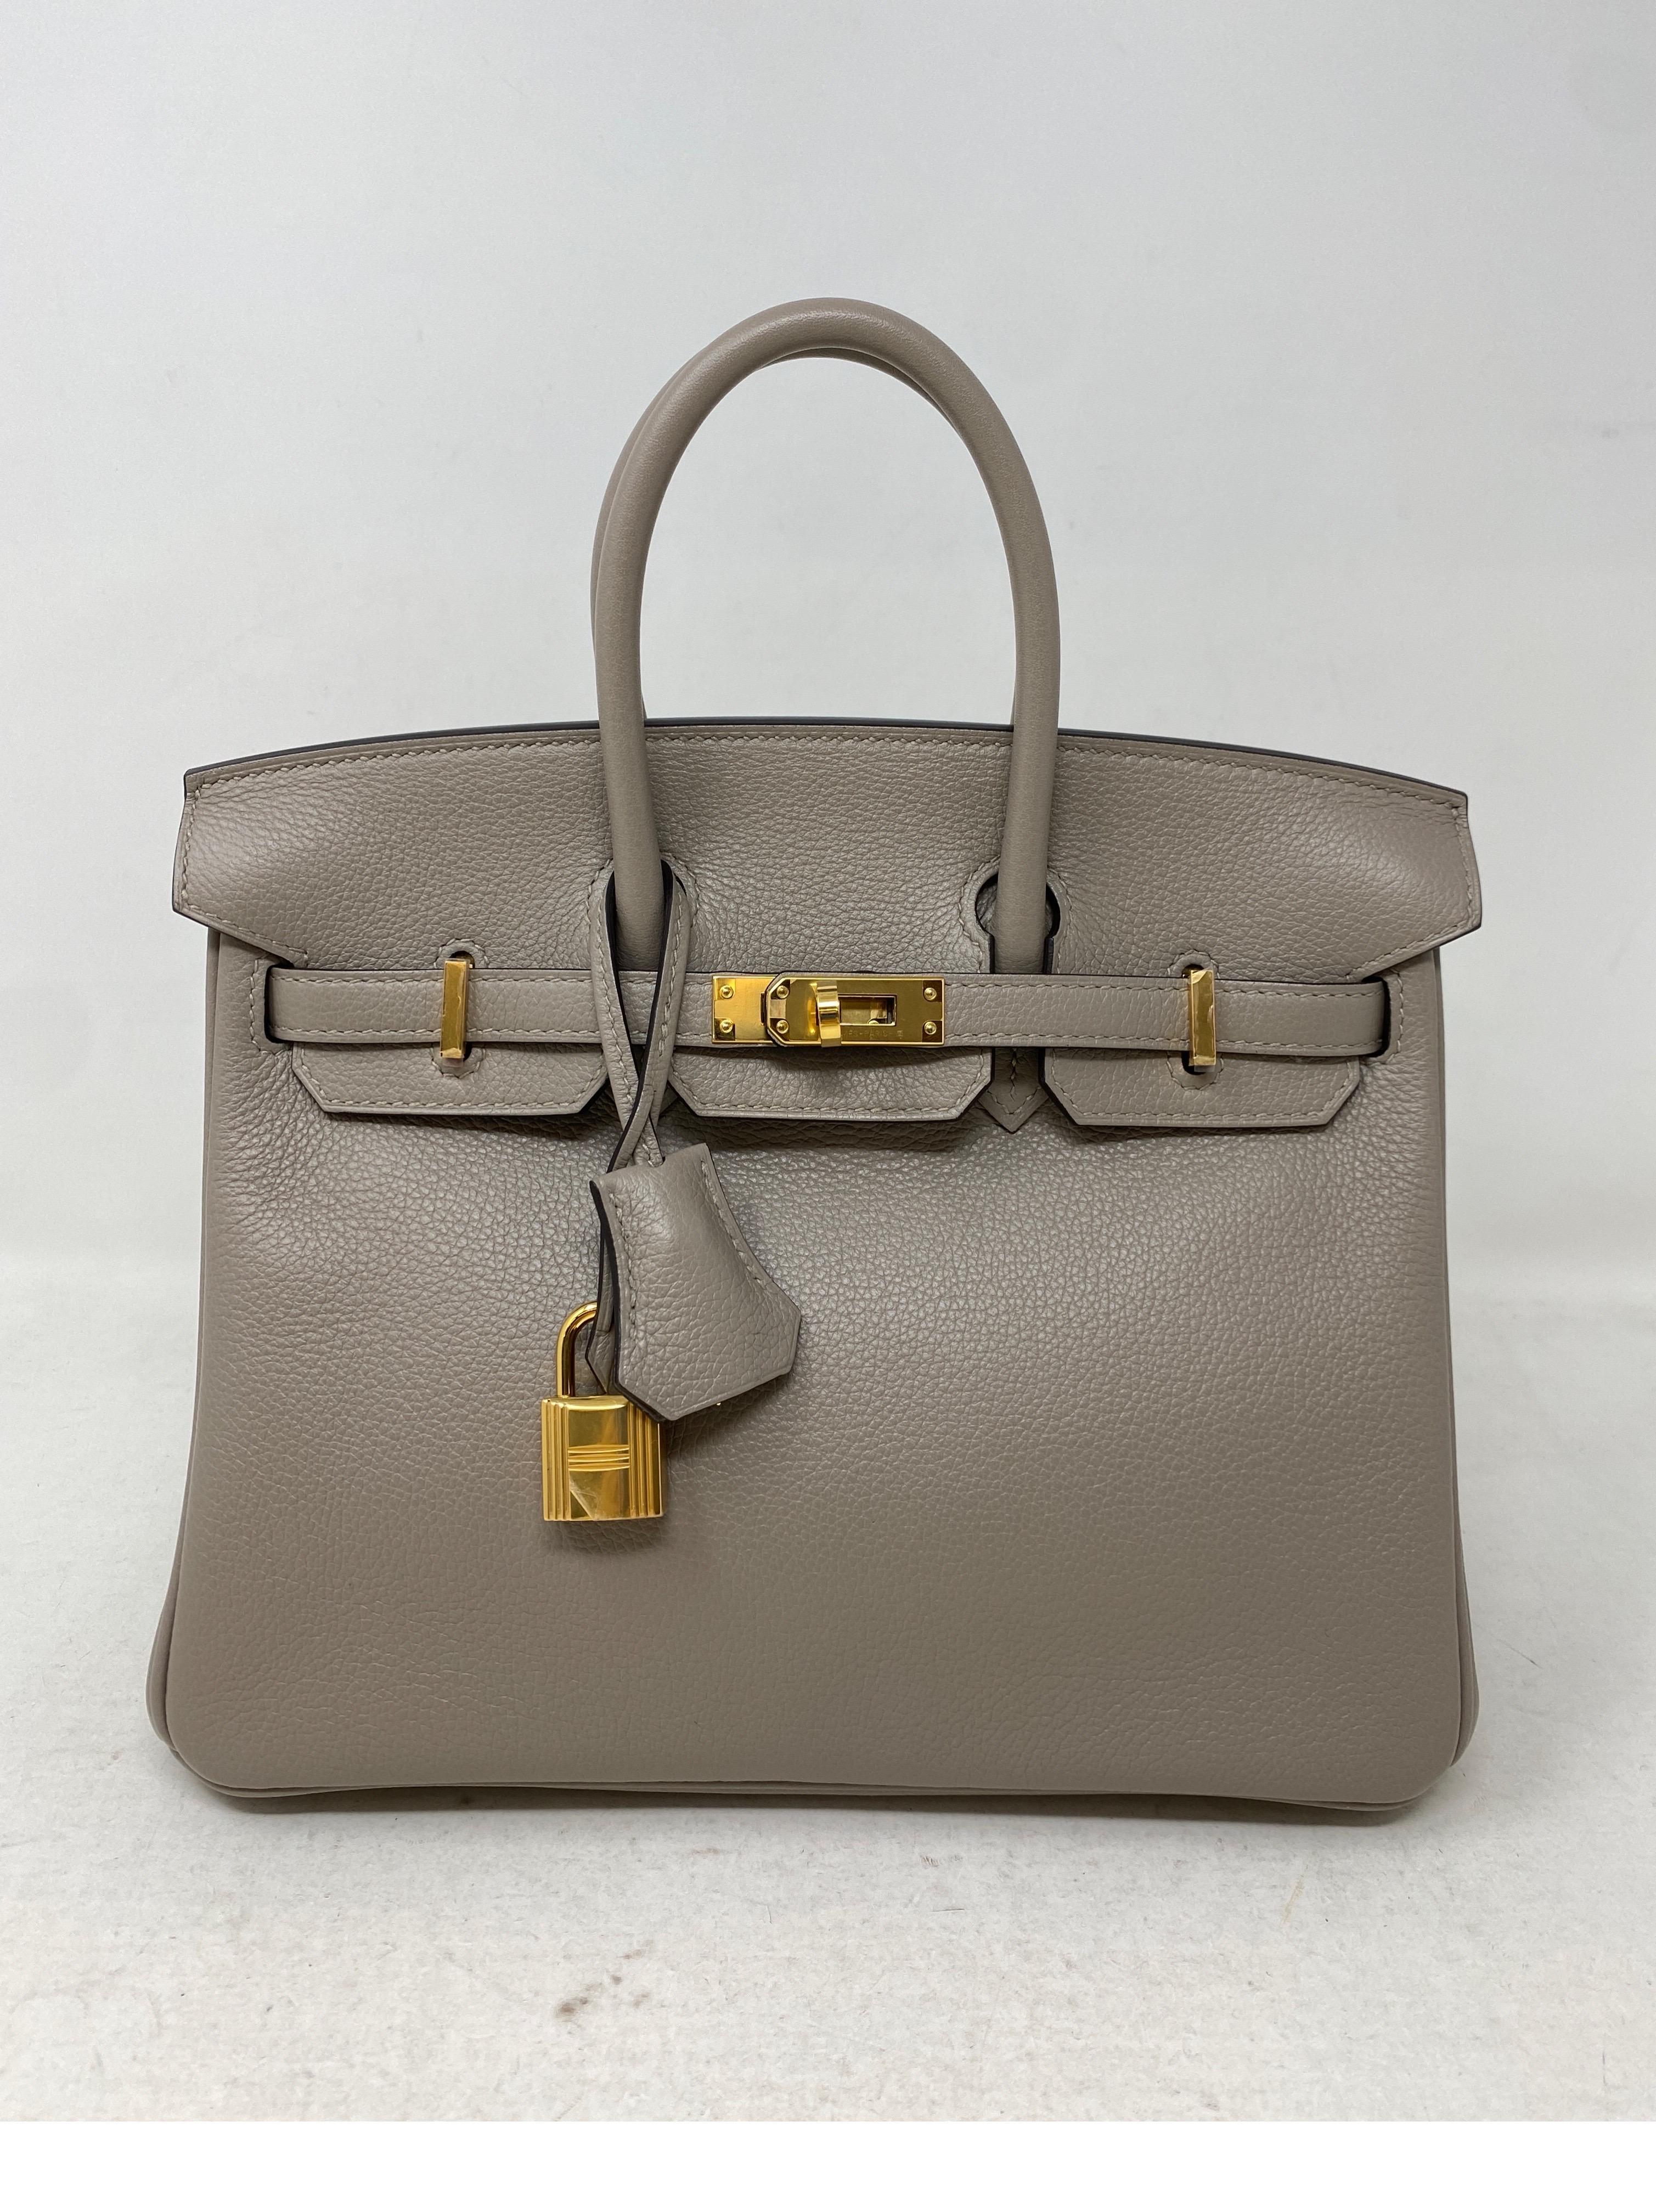 Hermes Gris Asphalte Birkin 25 Bag. Gorgeous light grey color. Gold hardware. Rare color and size. Unicorn 25 bag. Beautiful bag in excellent condition. Newer bag. Includes clochette, lock, keys, and dust bag. Guaranteed authentic. 